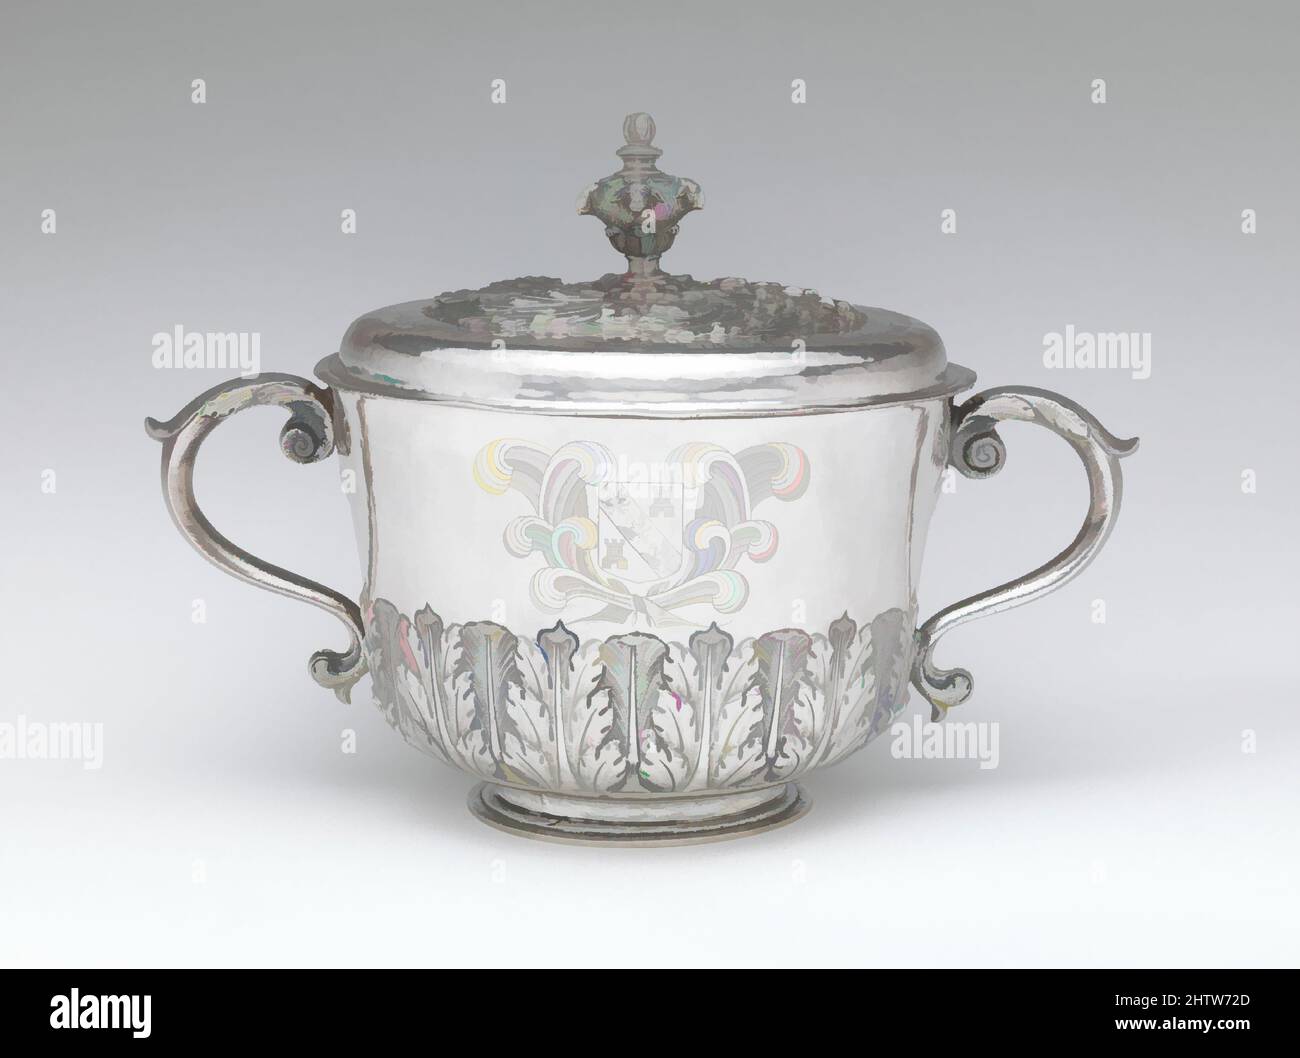 Art inspired by Two-handled cup with cover, I H (British, mid–late 17th century), 1676/77, British, London, Silver, Overall (confirmed): 9 9/16 x 13 1/2 x 8 7/8 in. (24.3 x 34.3 x 22.5 cm), Metalwork-Silver, I H (British, mid–late 17th century), This cup originally was made for use in, Classic works modernized by Artotop with a splash of modernity. Shapes, color and value, eye-catching visual impact on art. Emotions through freedom of artworks in a contemporary way. A timeless message pursuing a wildly creative new direction. Artists turning to the digital medium and creating the Artotop NFT Stock Photo